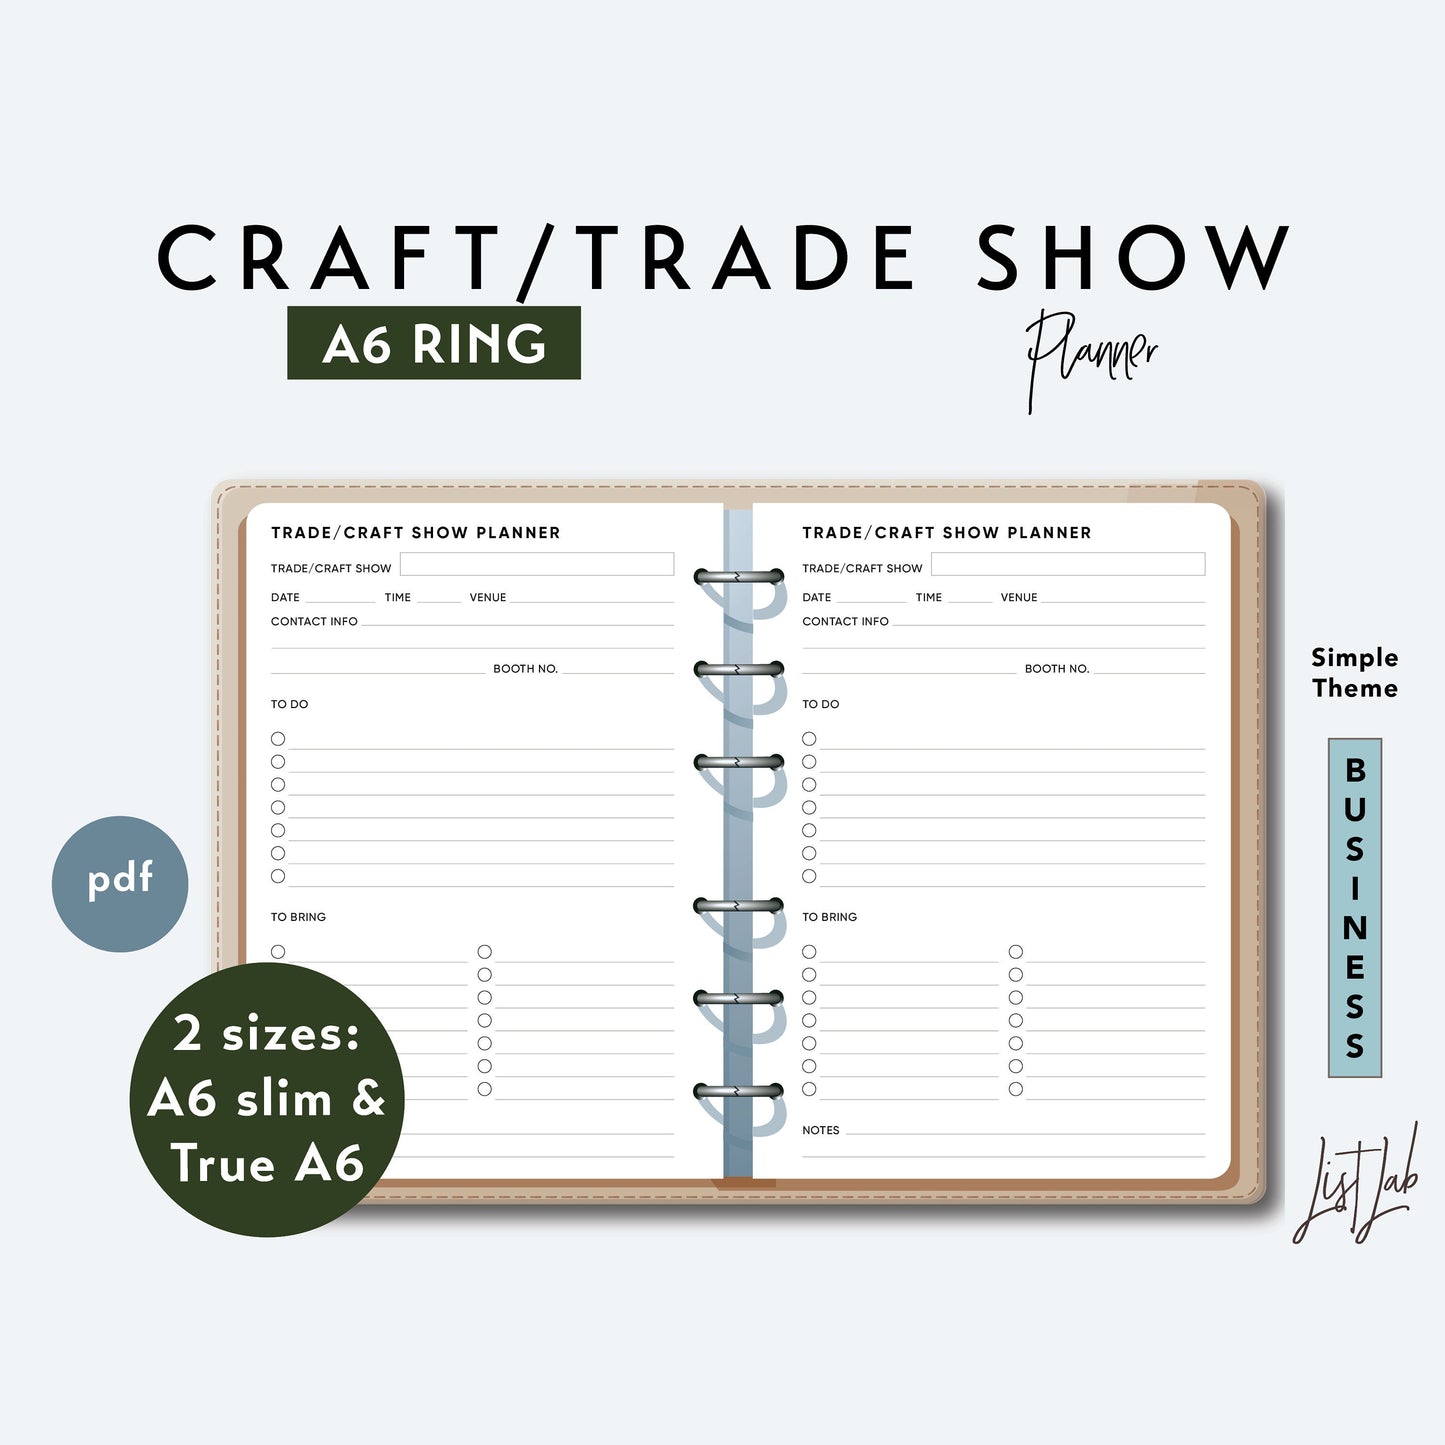 A6 Ring CRAFT TRADE SHOW PLANNER Printable Set